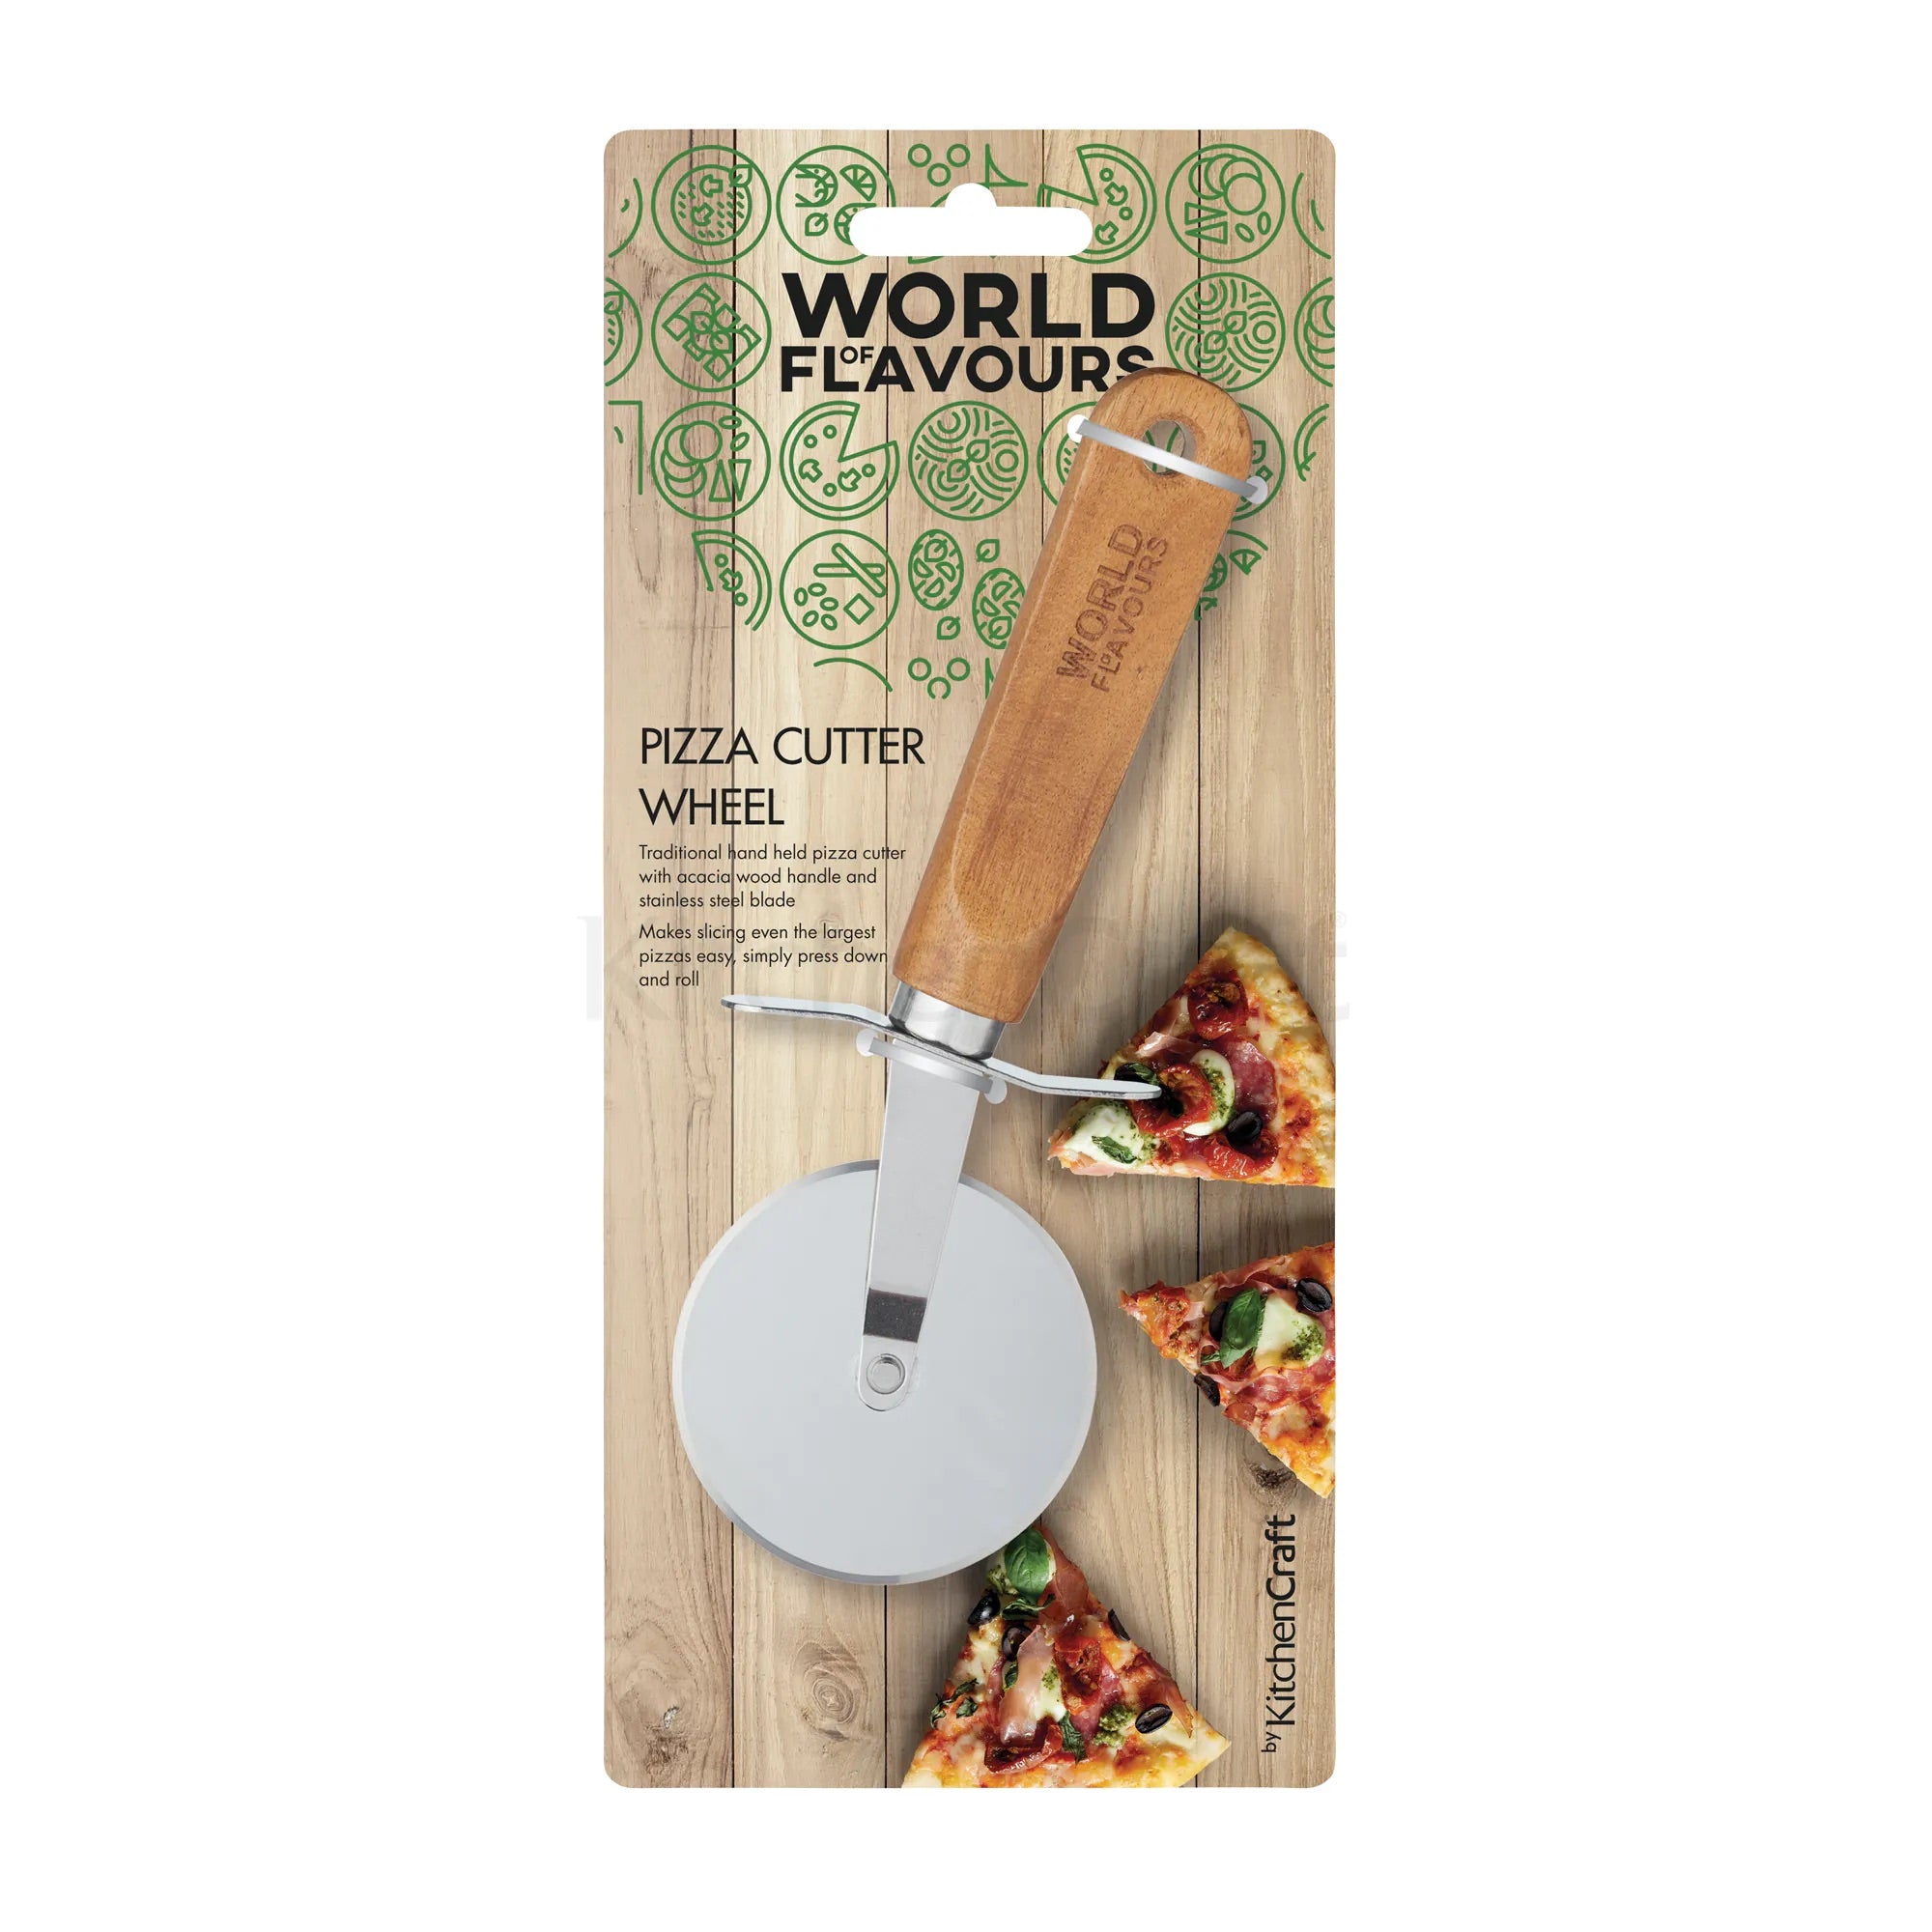 KitchenCraft World of Flavours Italian Deluxe Double Cutter Pasta